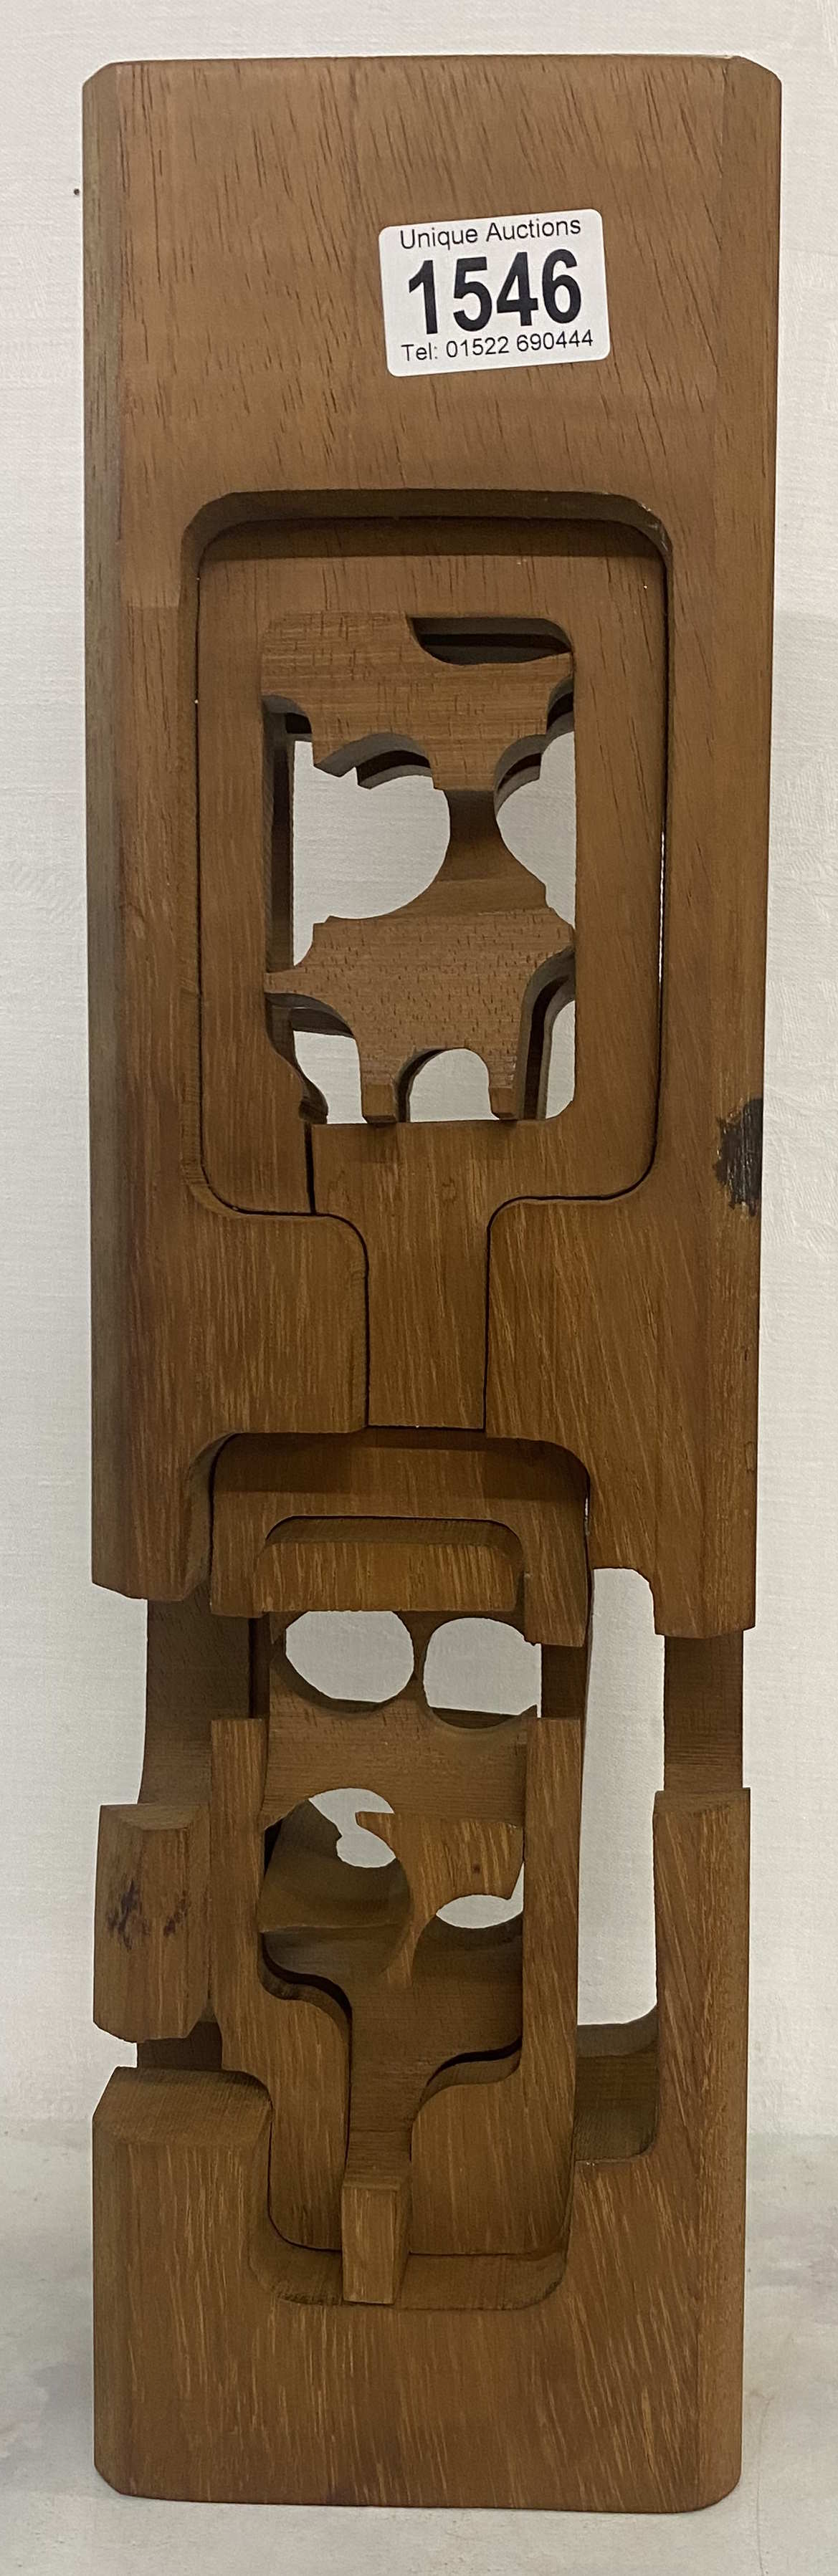 An abstract wooden sculpture attributed to Brian Willsher - Image 2 of 14